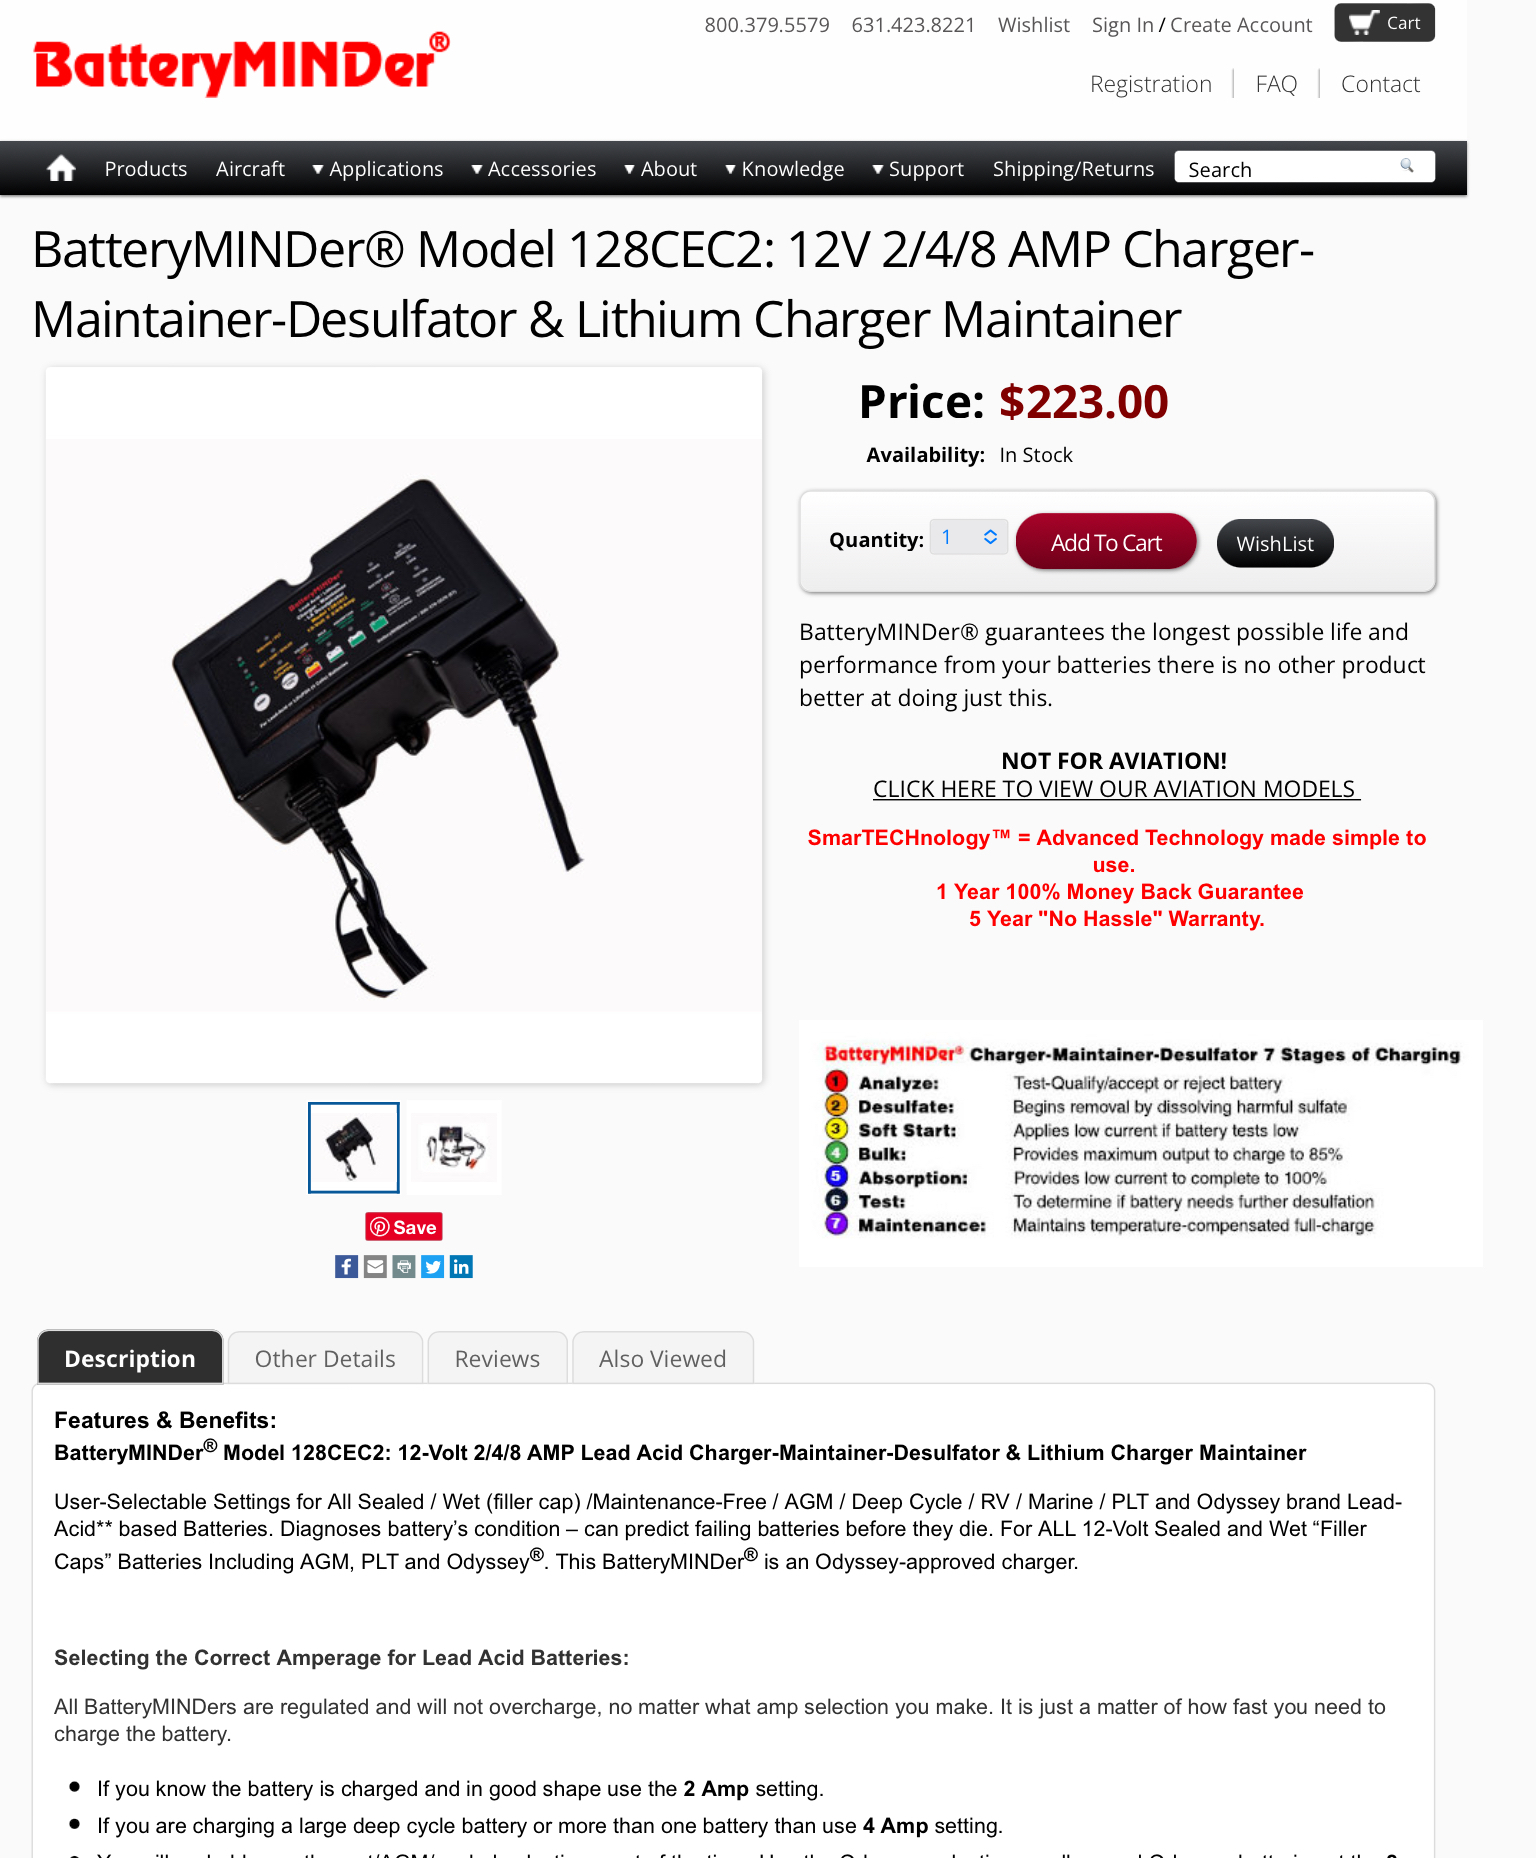 No Dead Car Battery: Hulkman Sigma 5 Amp Battery Charger